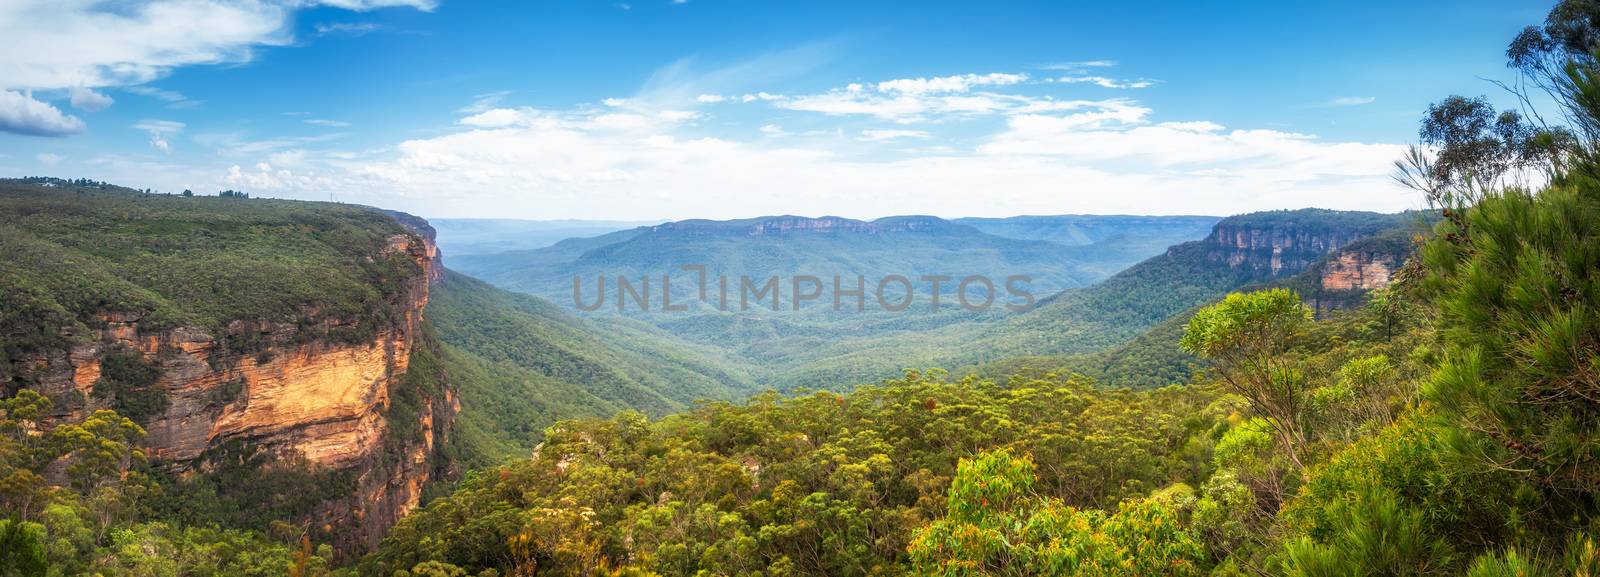 the Blue Mountains Australia panorama by magann